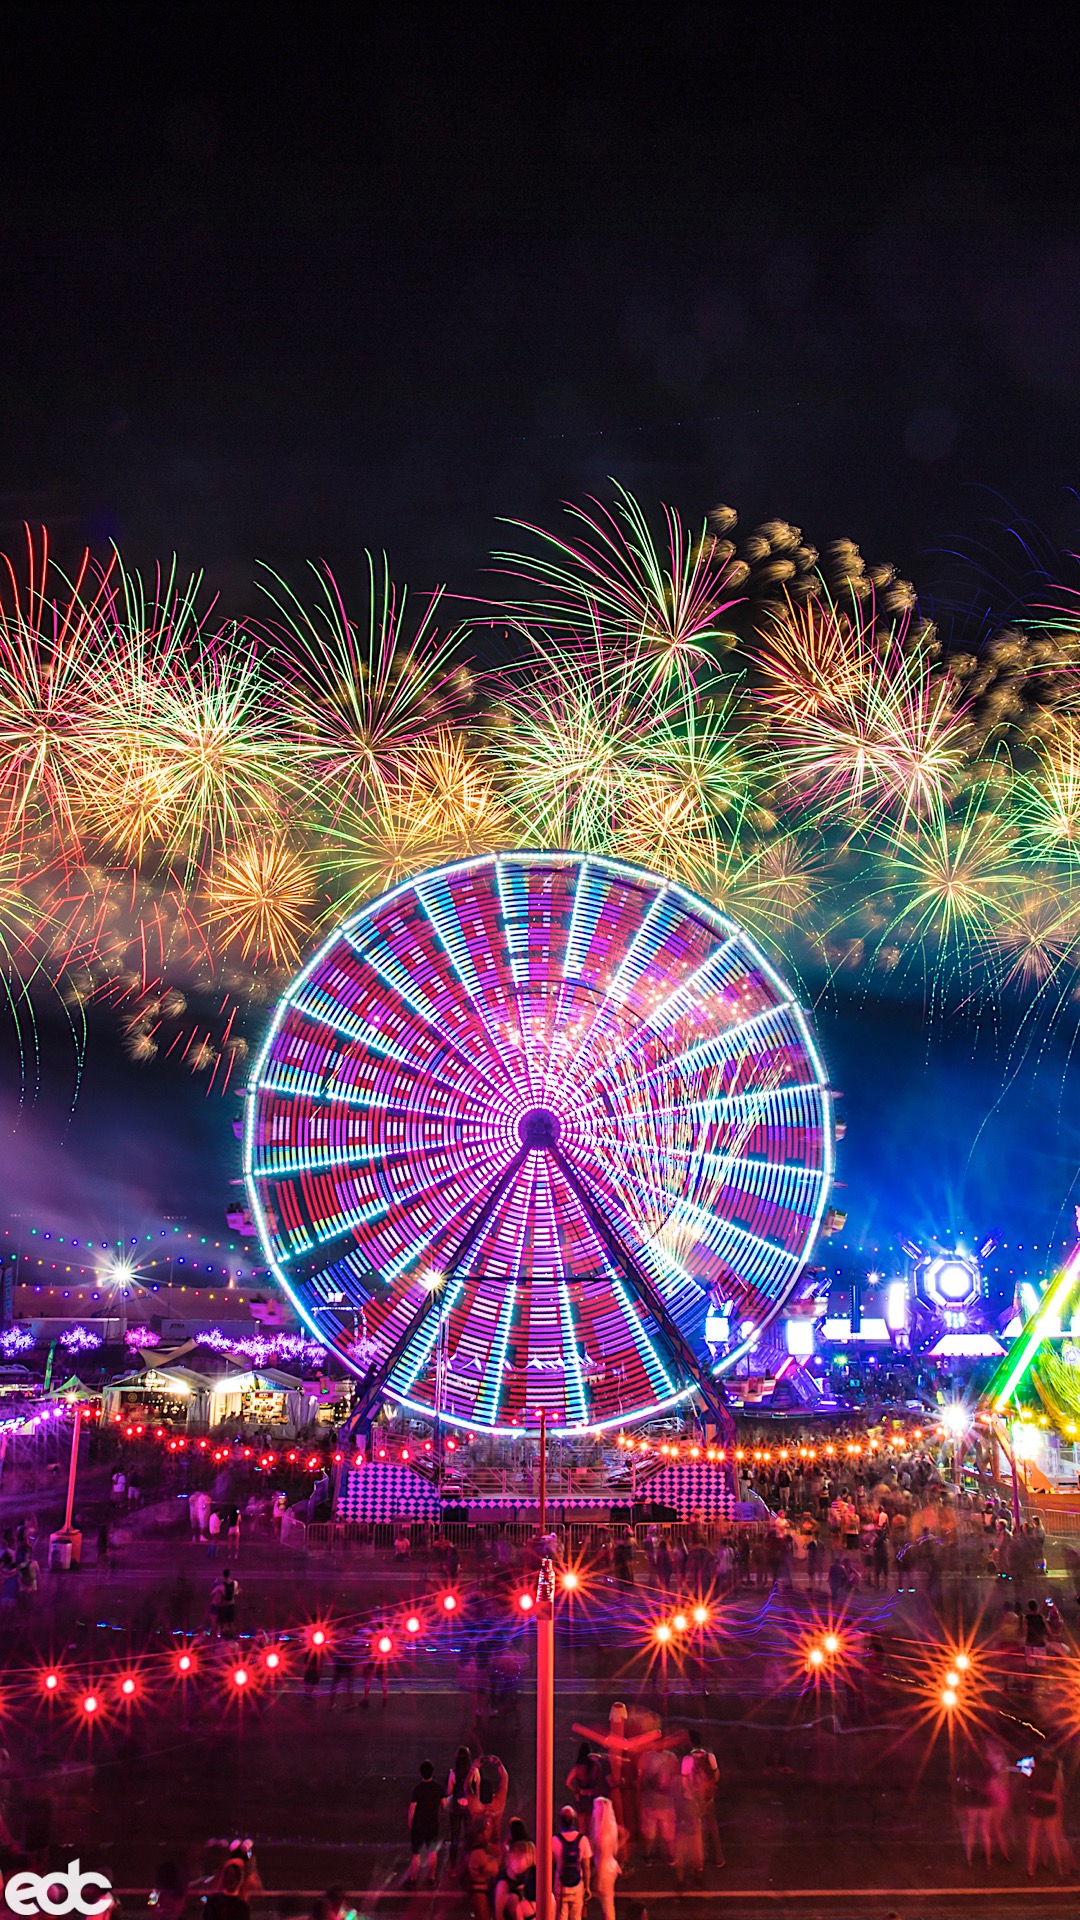 These Epic Edc Las Vegas Wallpaper For Your Phone